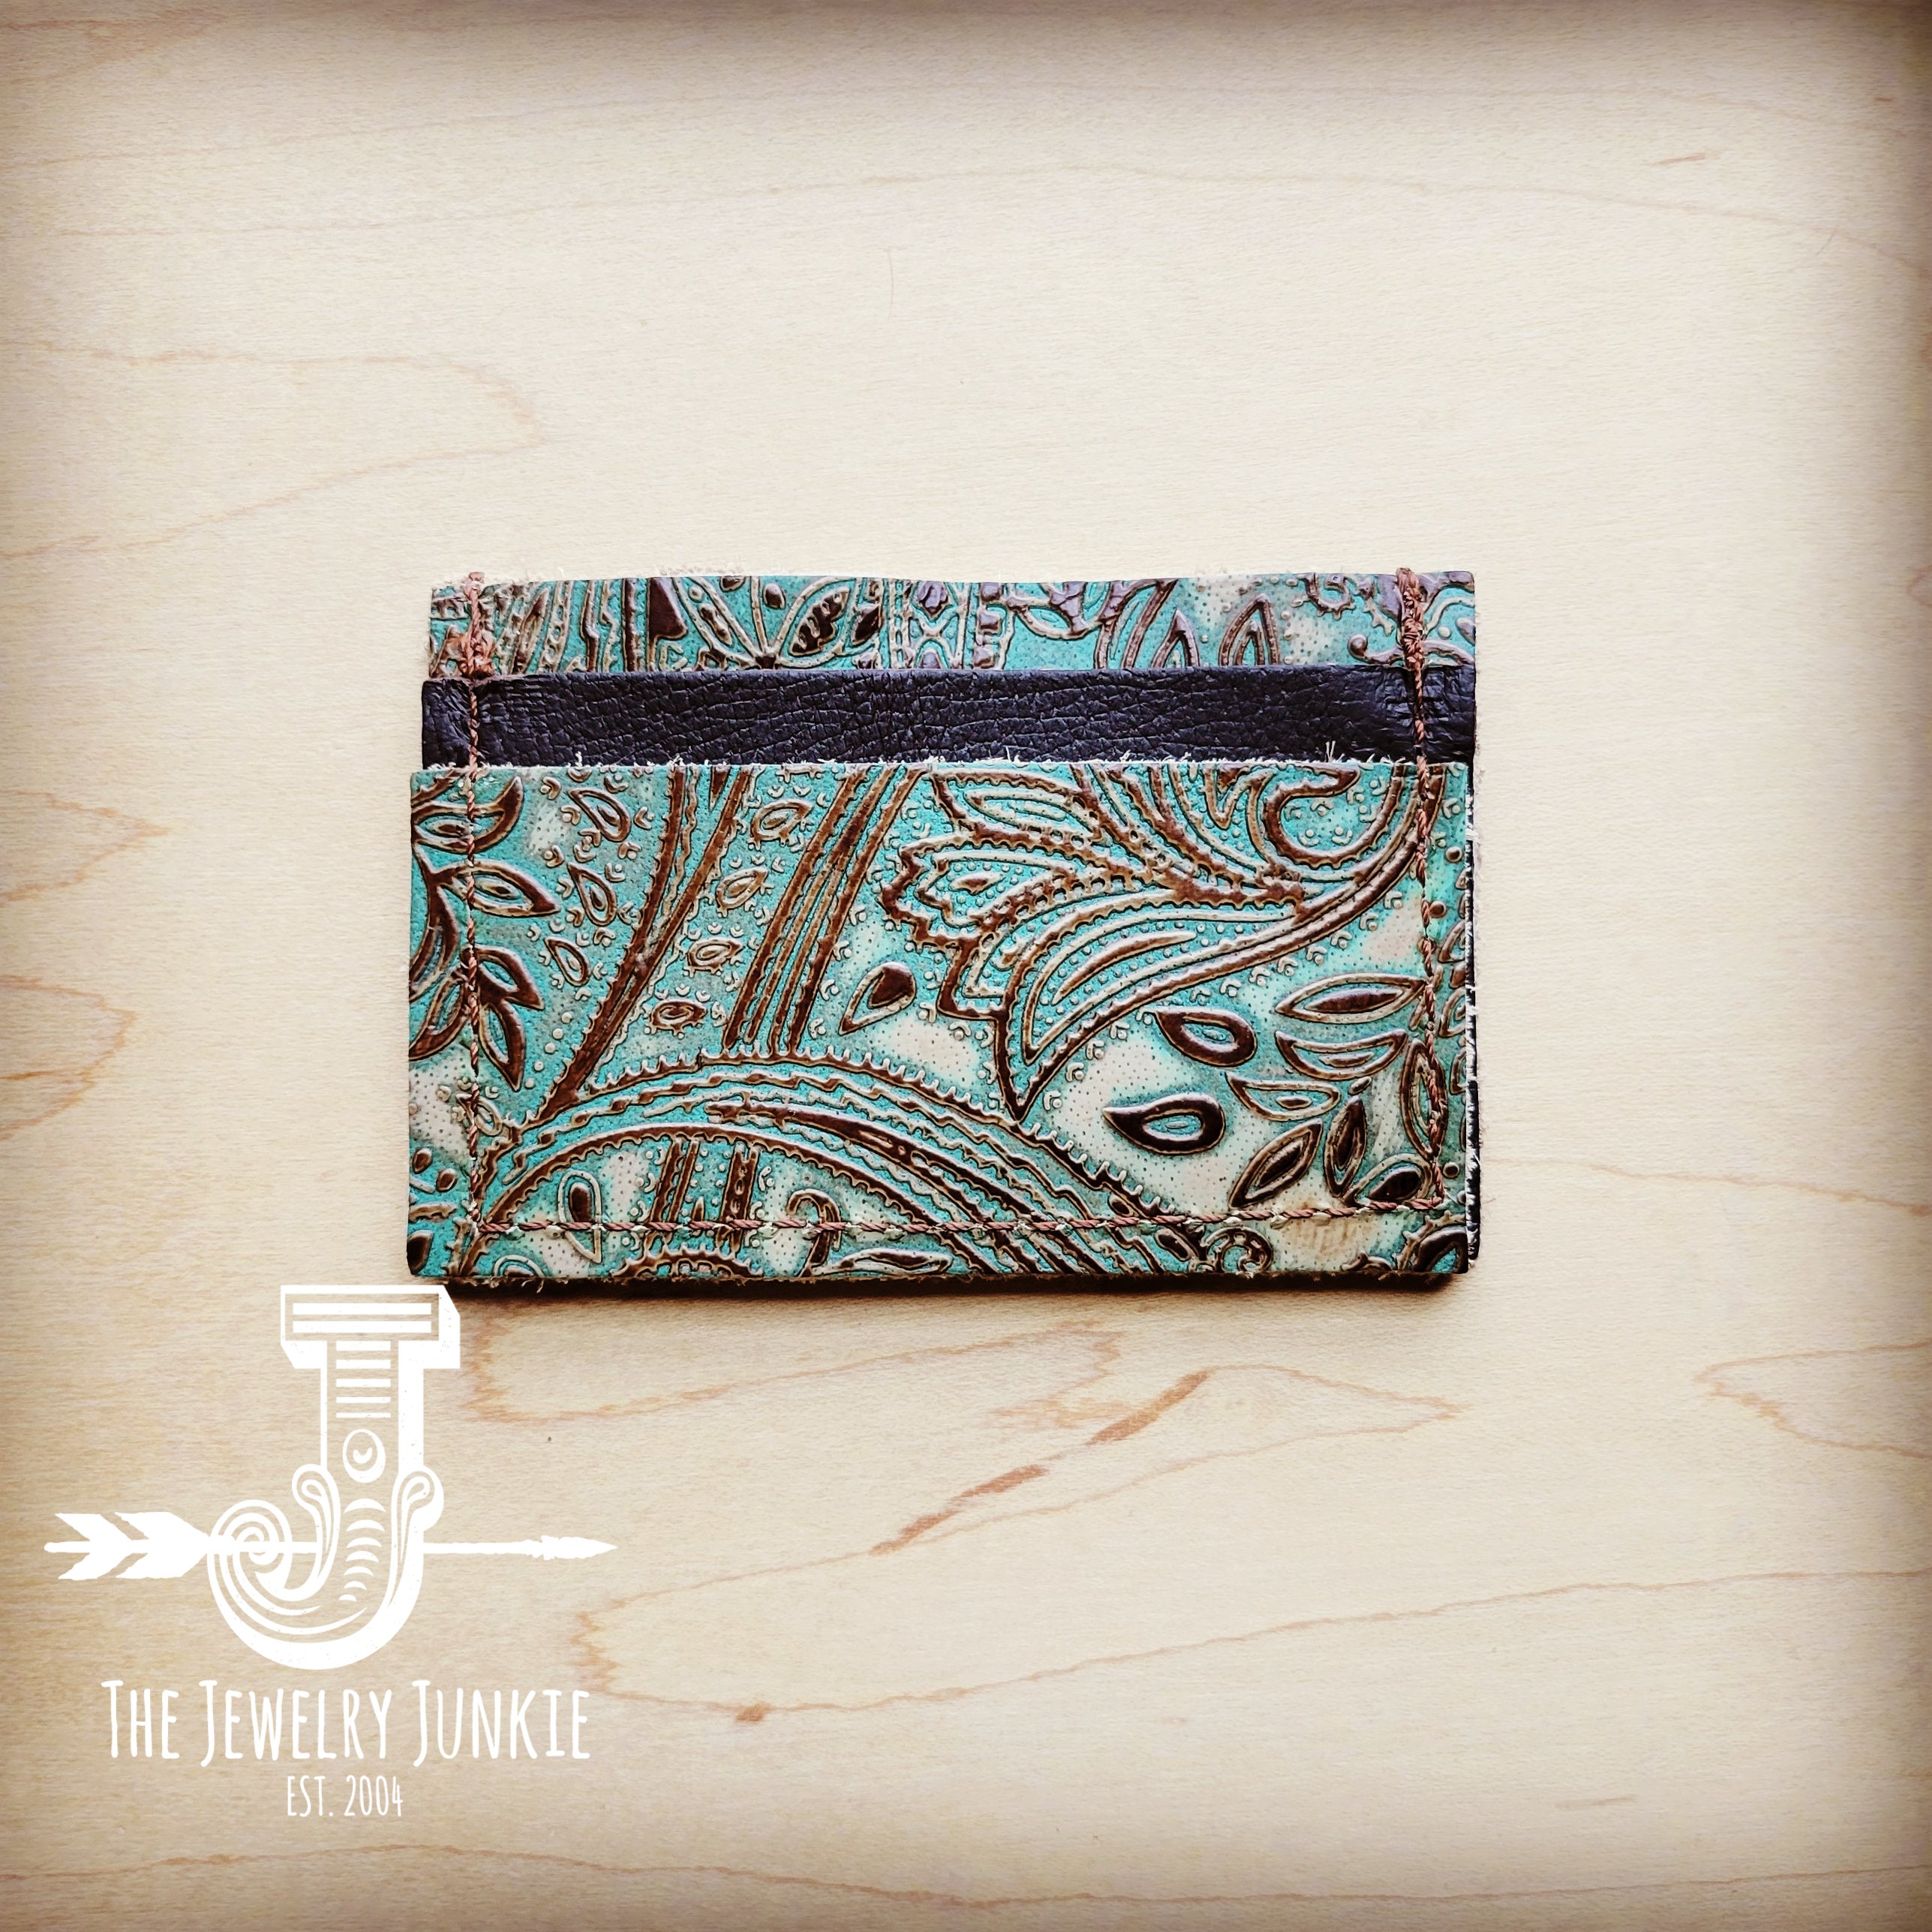 Embossed Leather Credit Card Wallets